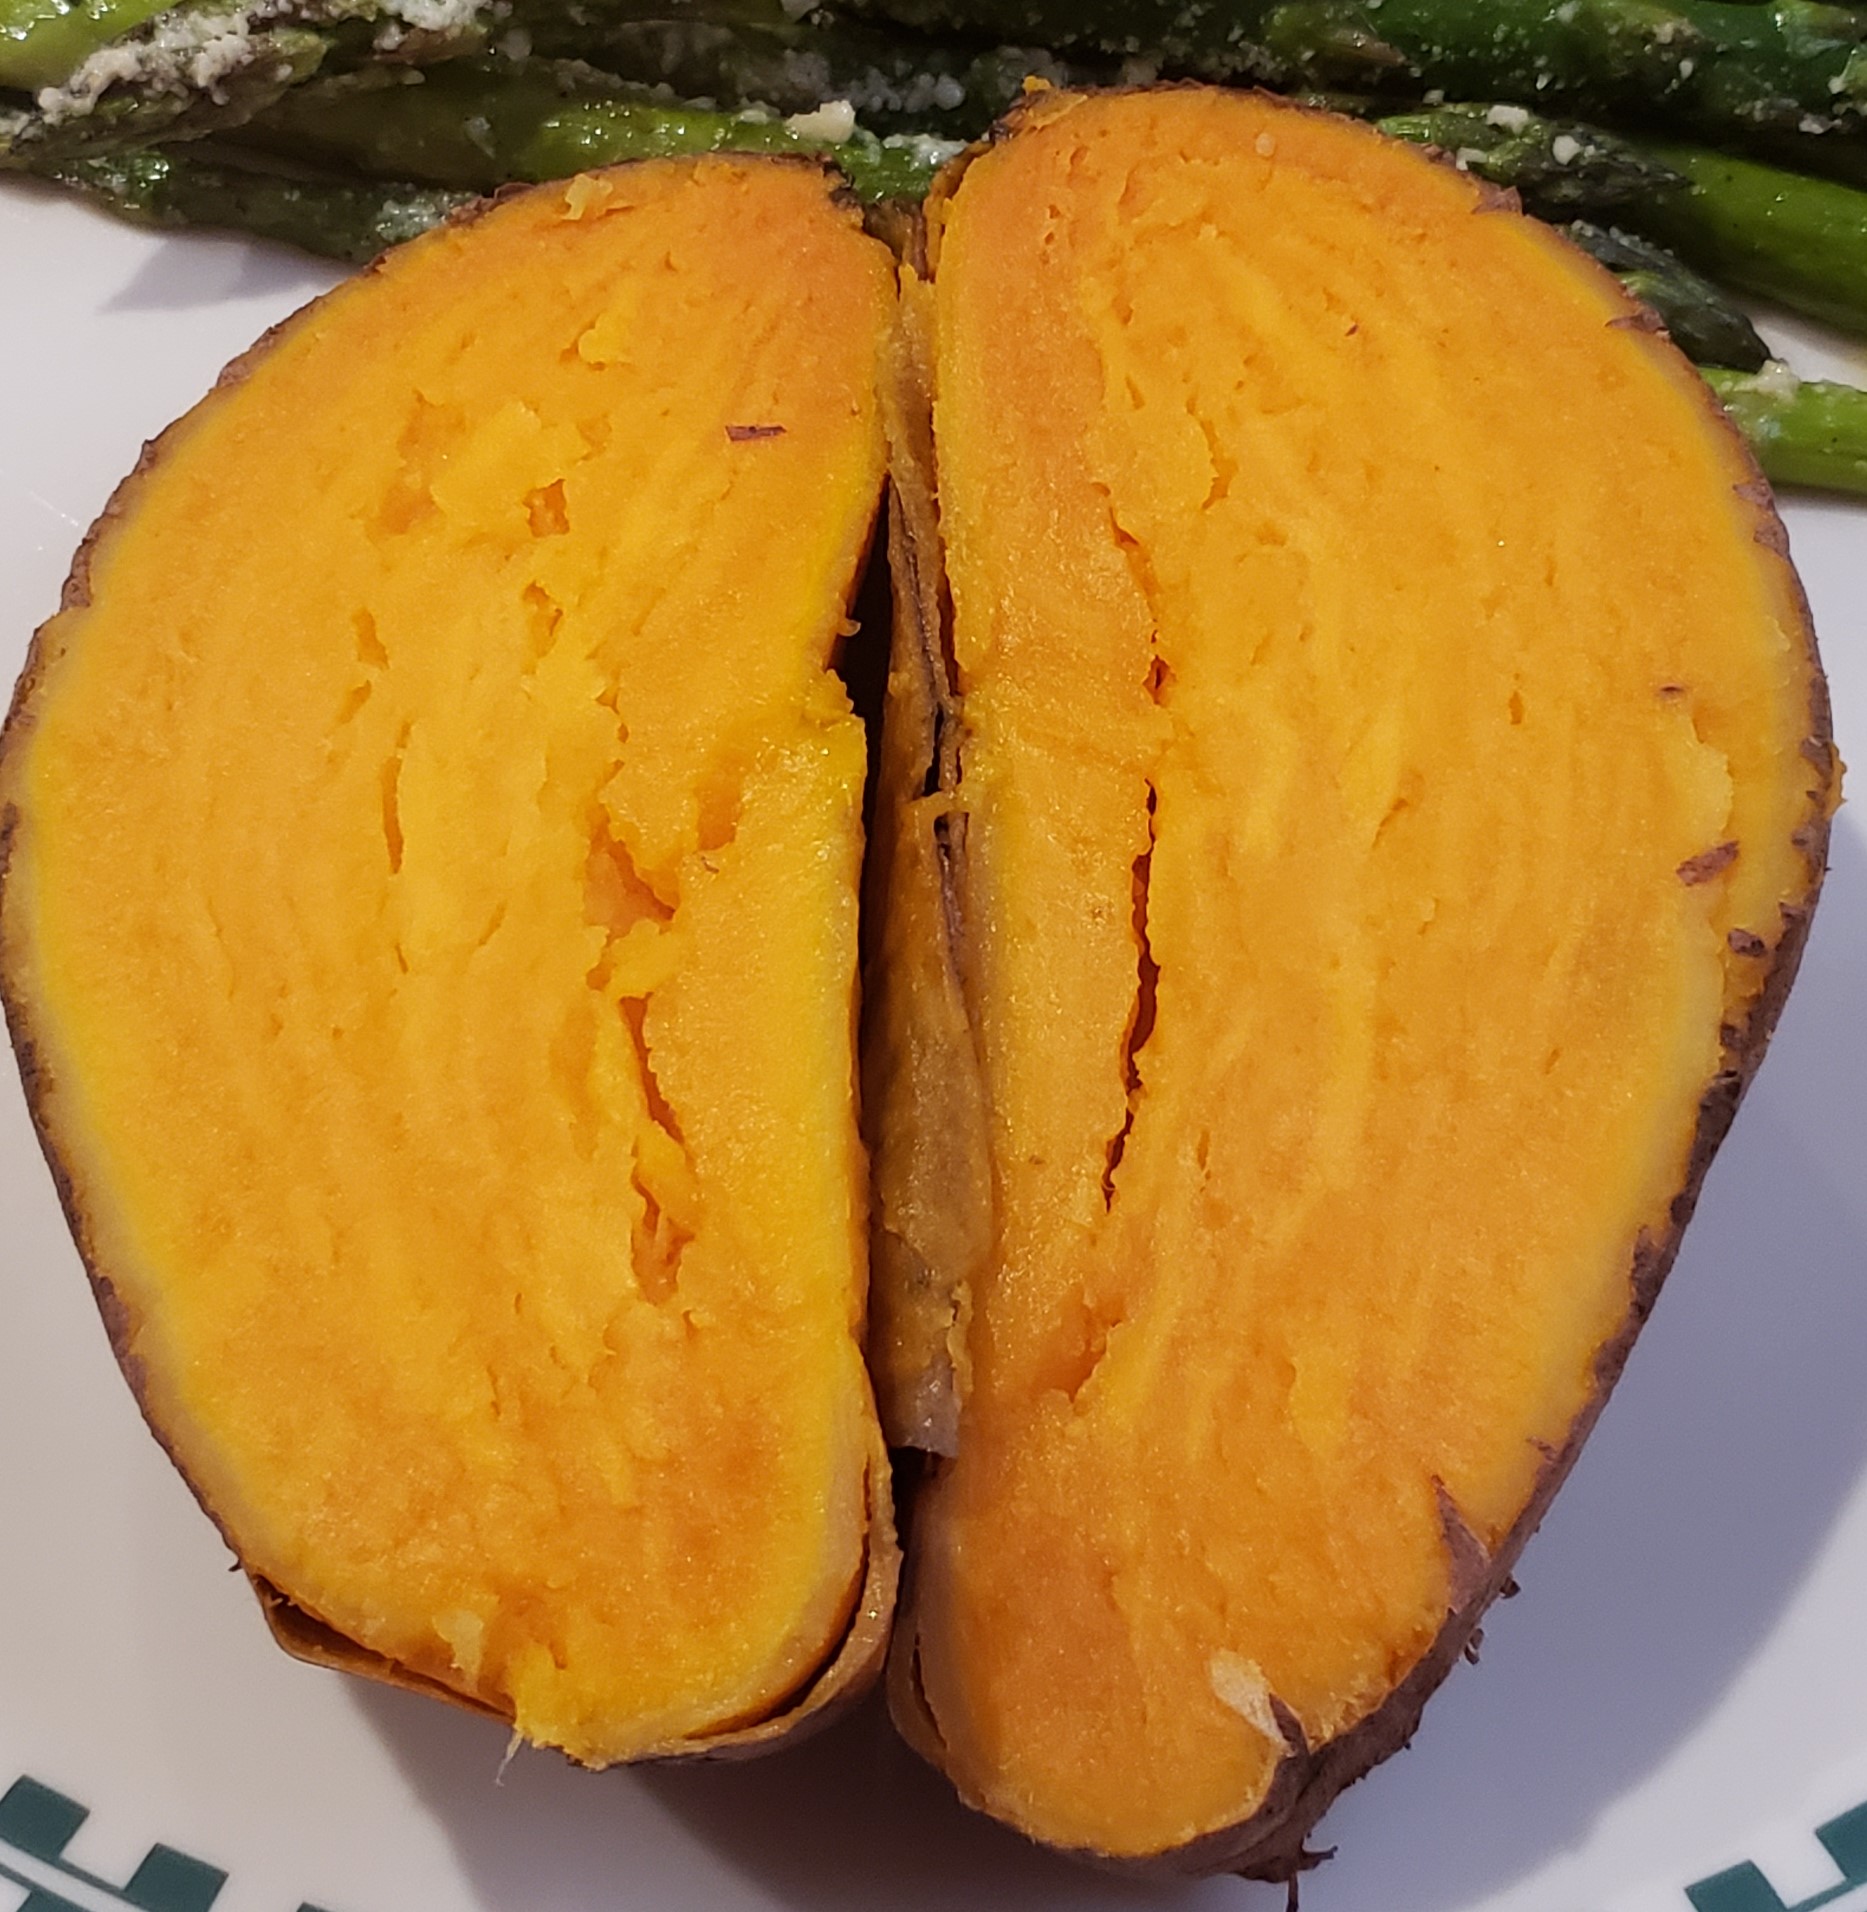 a big, orange, cooked sweet potato cut in half on a plate.